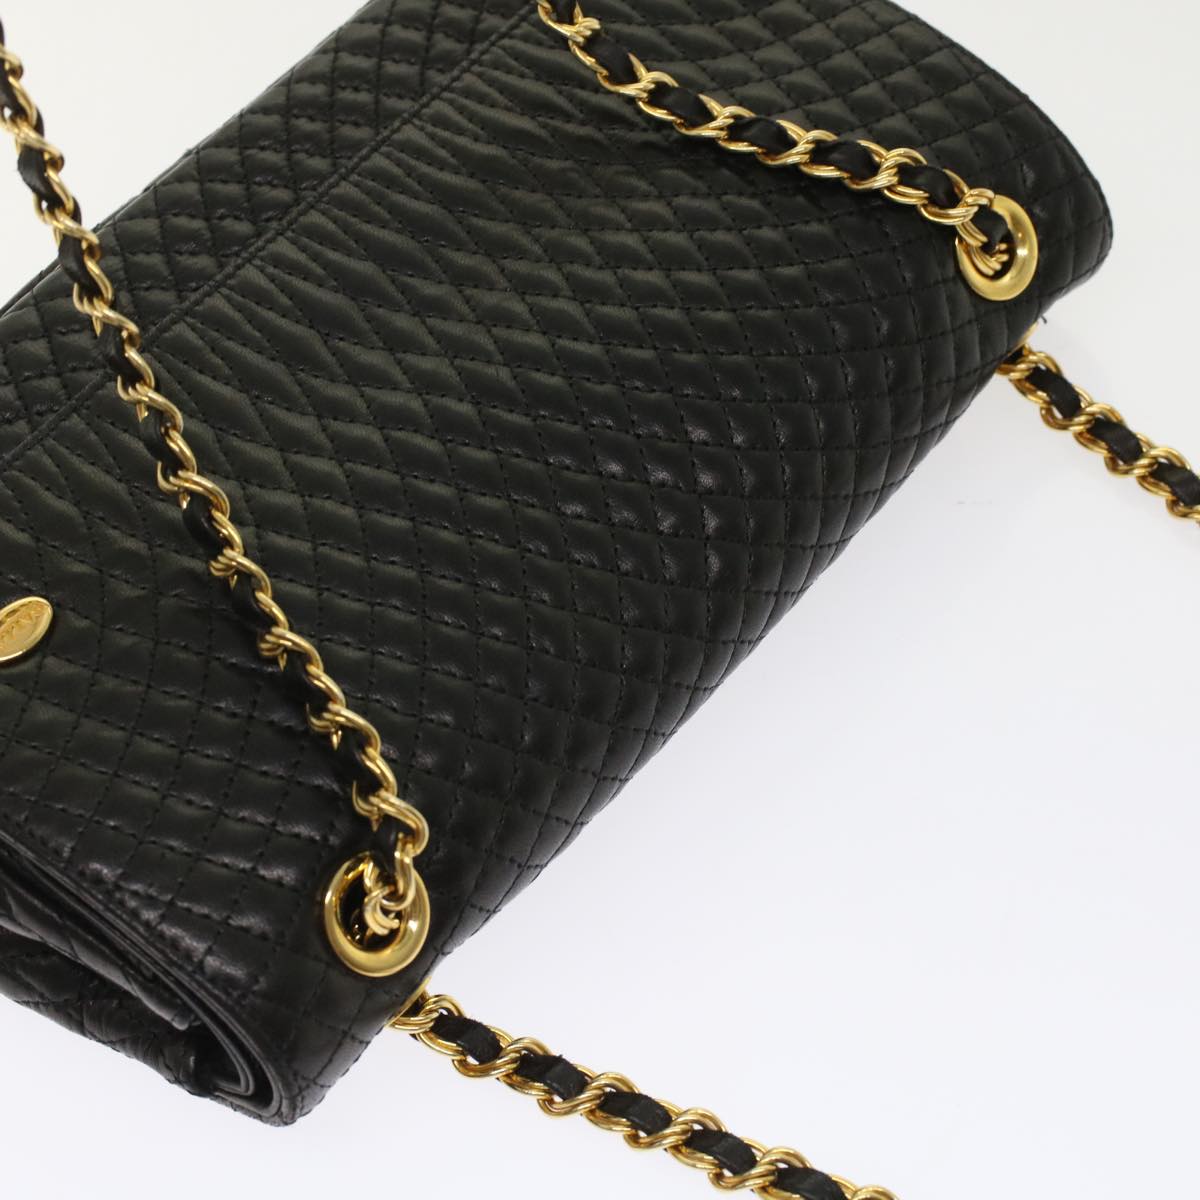 BALLY Quilted Chain Shoulder Bag Leather Black Auth yk7978